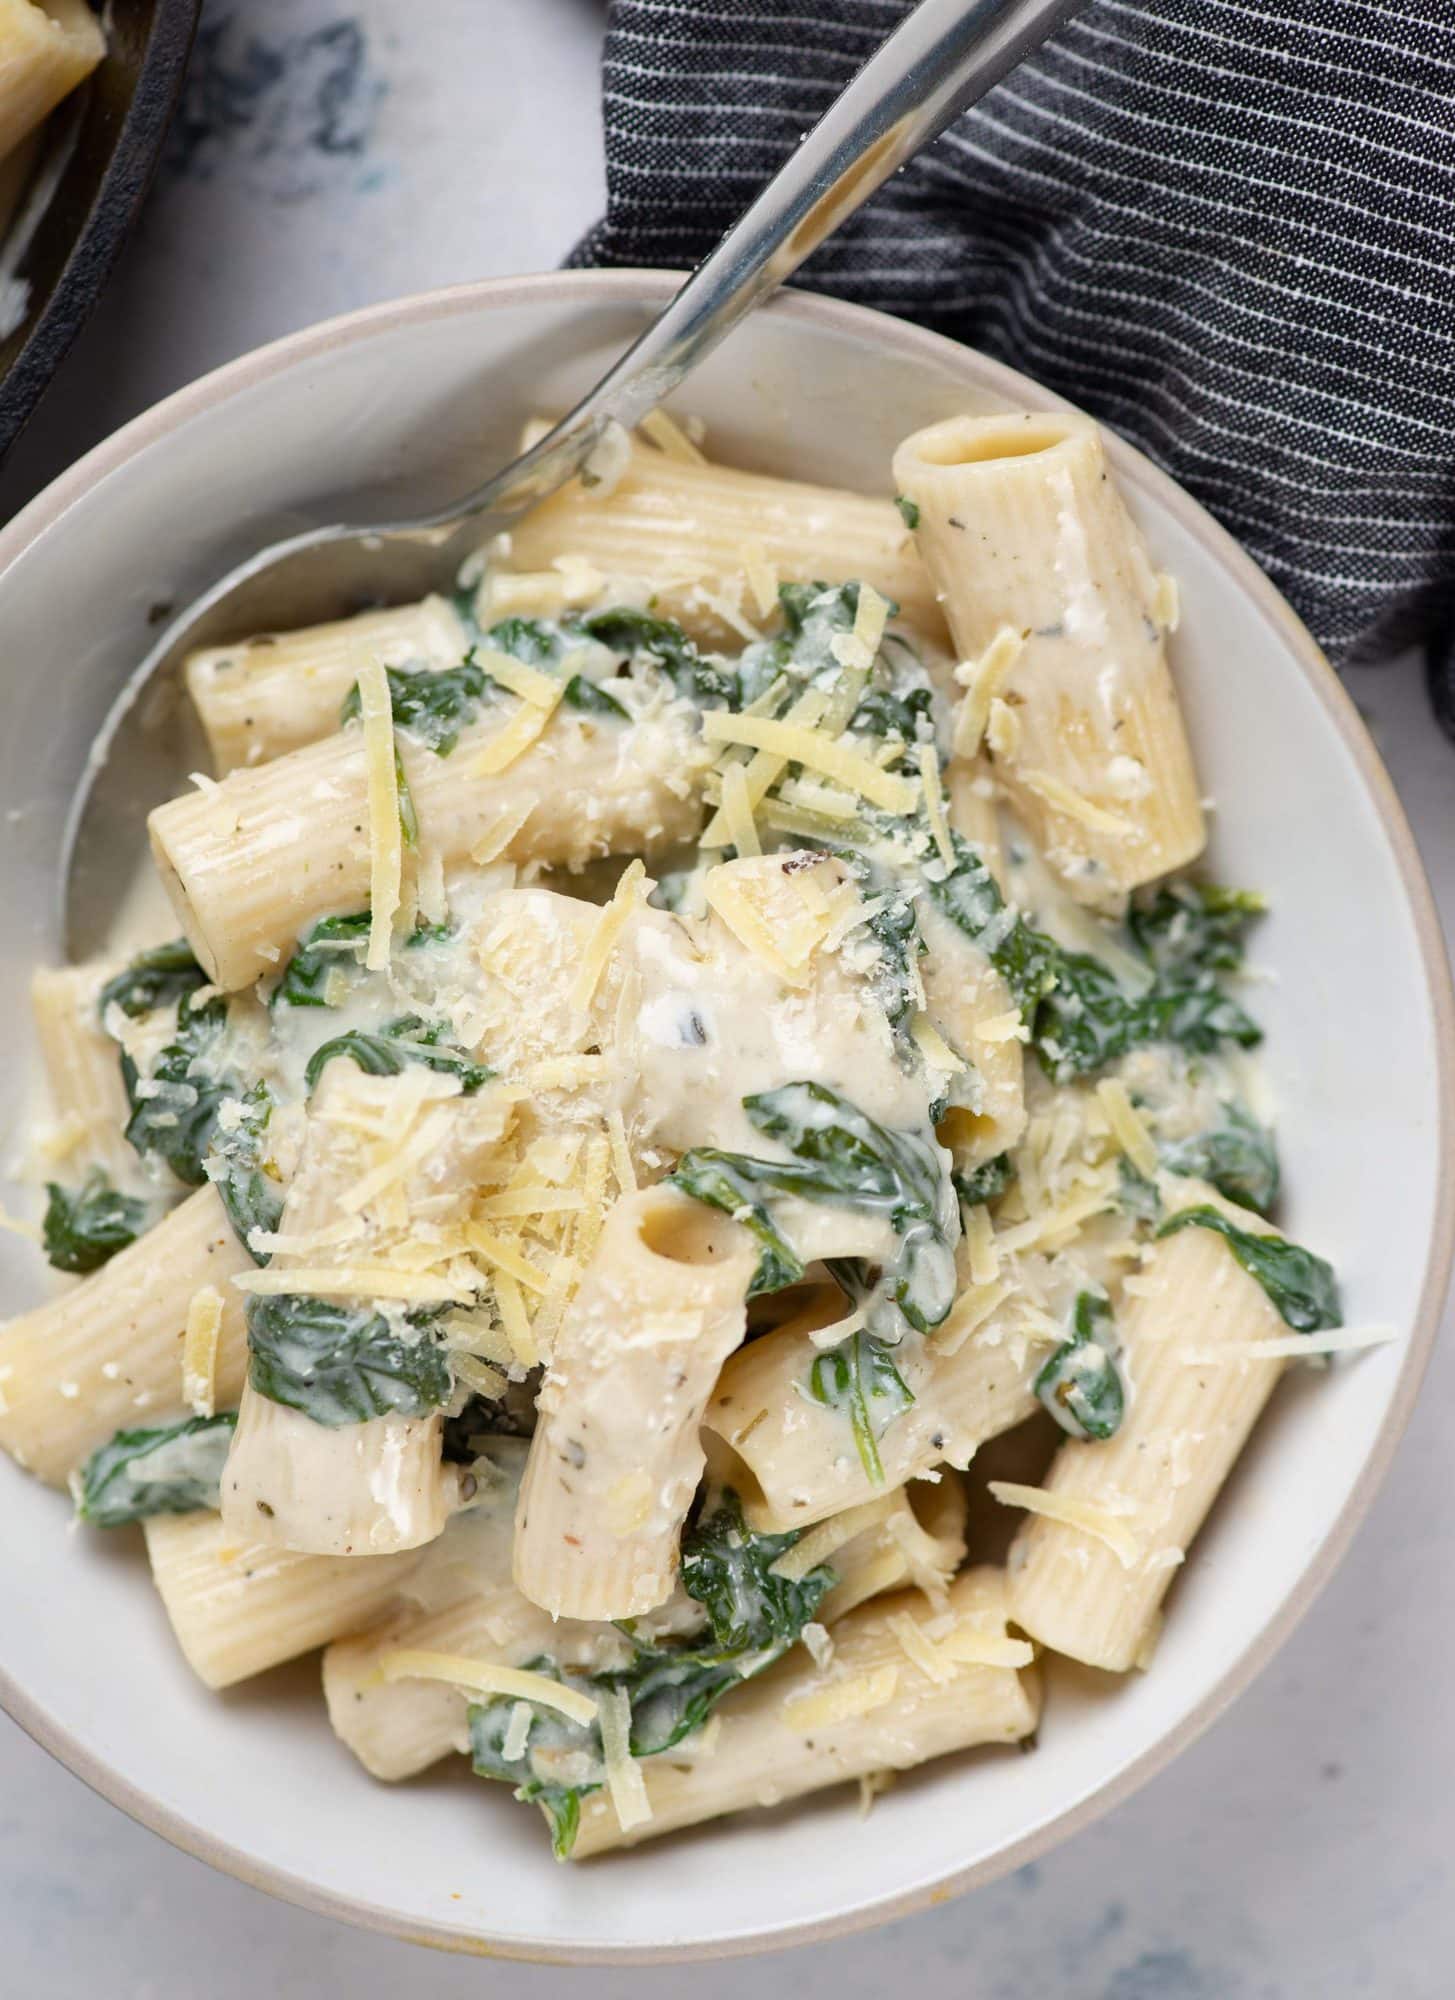 Spinach pasta in a creamy sauce and spinach served in a bowl with shredded cheese garnished on it.